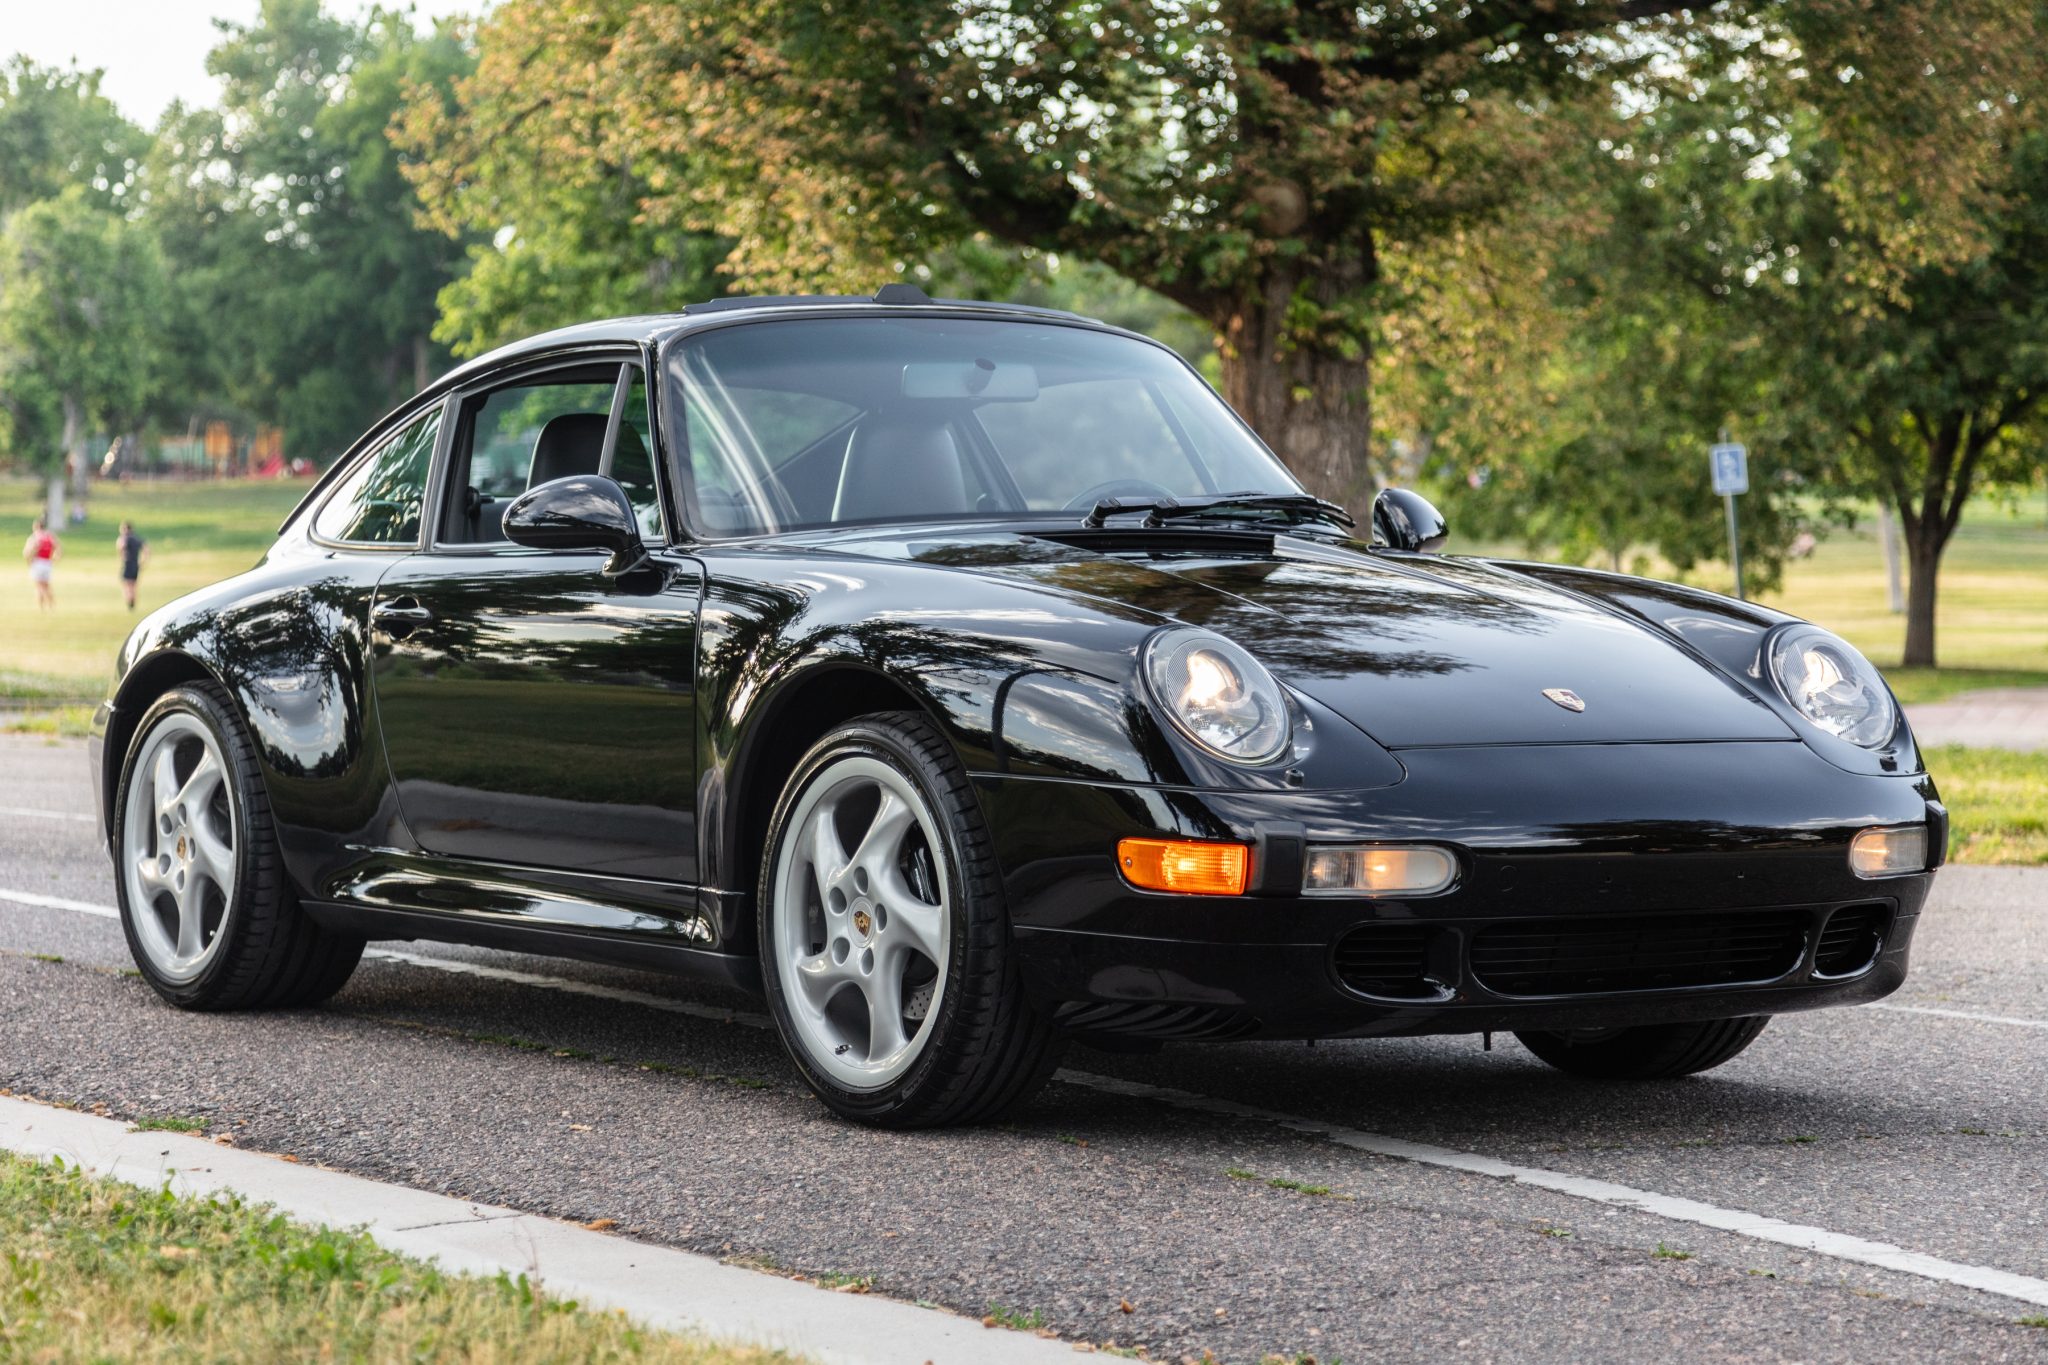 Used 37k-Mile 1998 Porsche 911 Carrera S Coupe 6-Speed Review